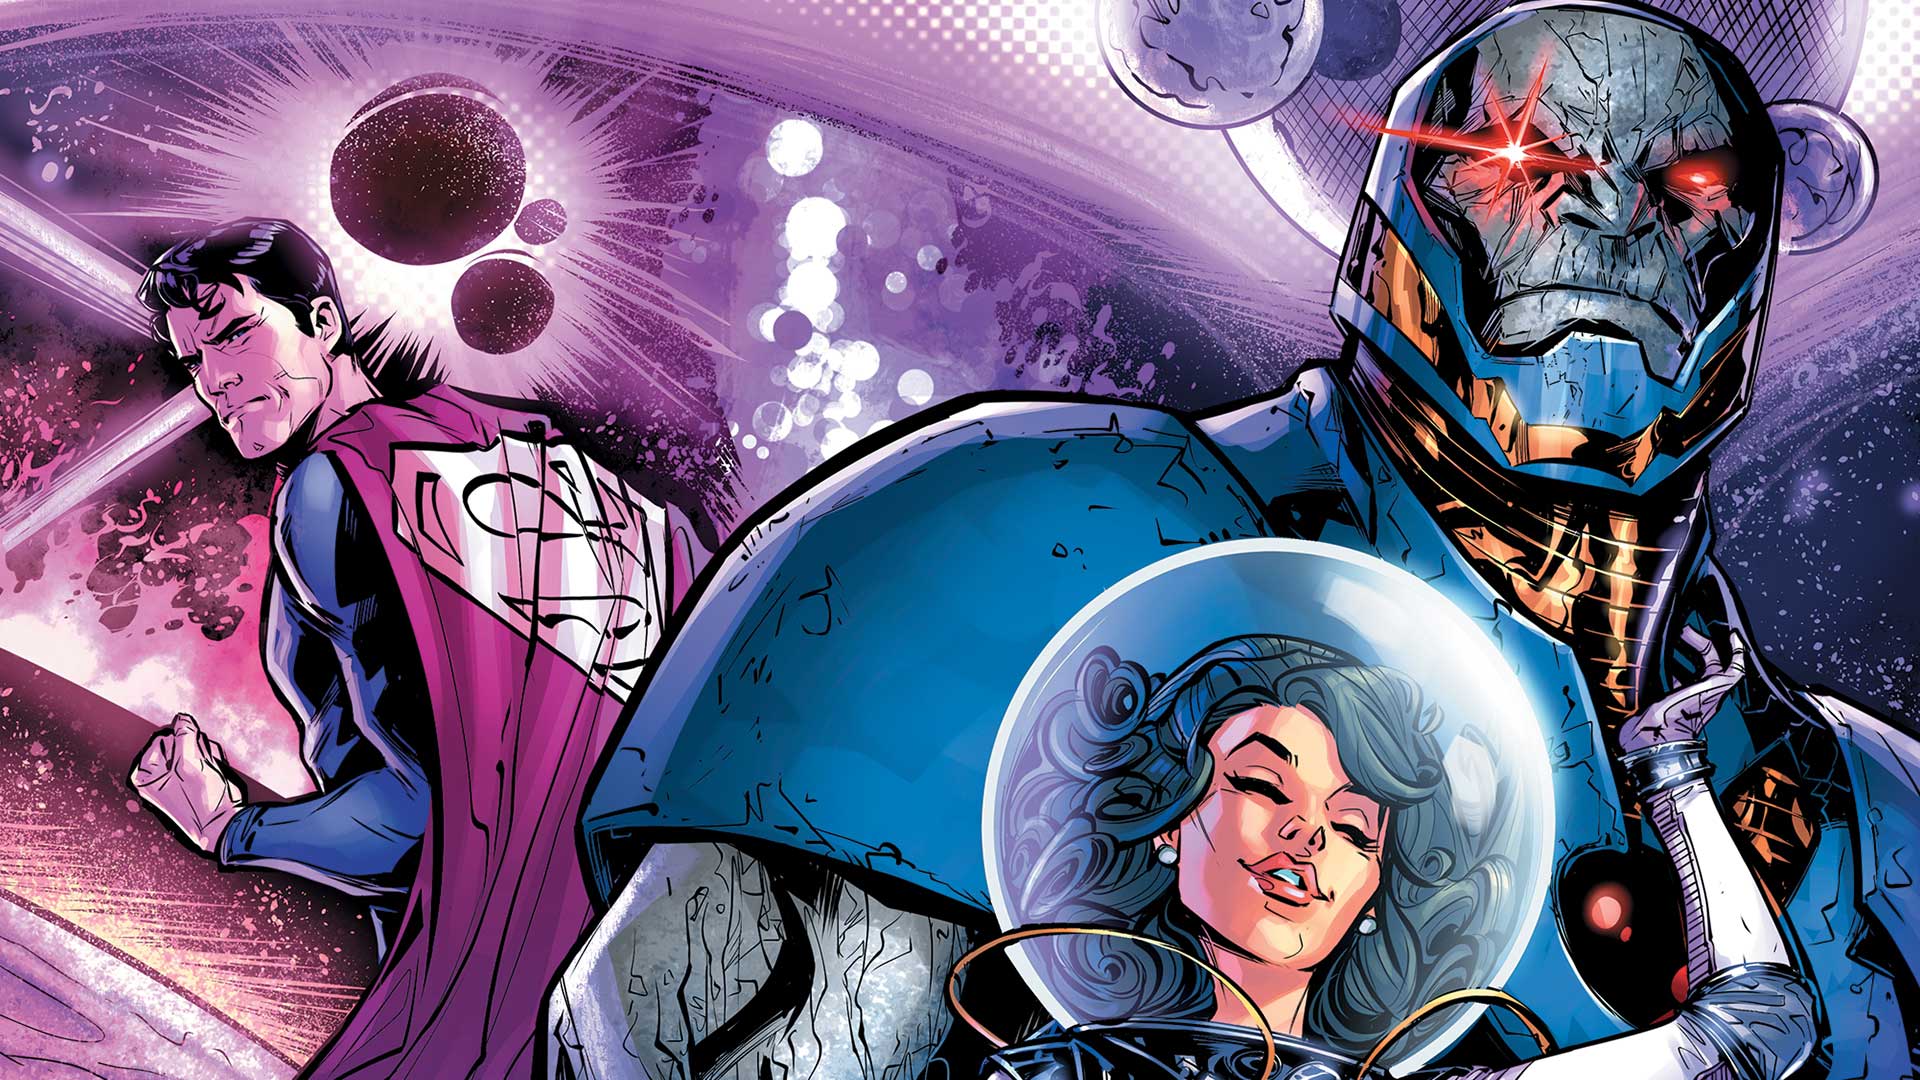 Mystery of Love in Space #1 Review